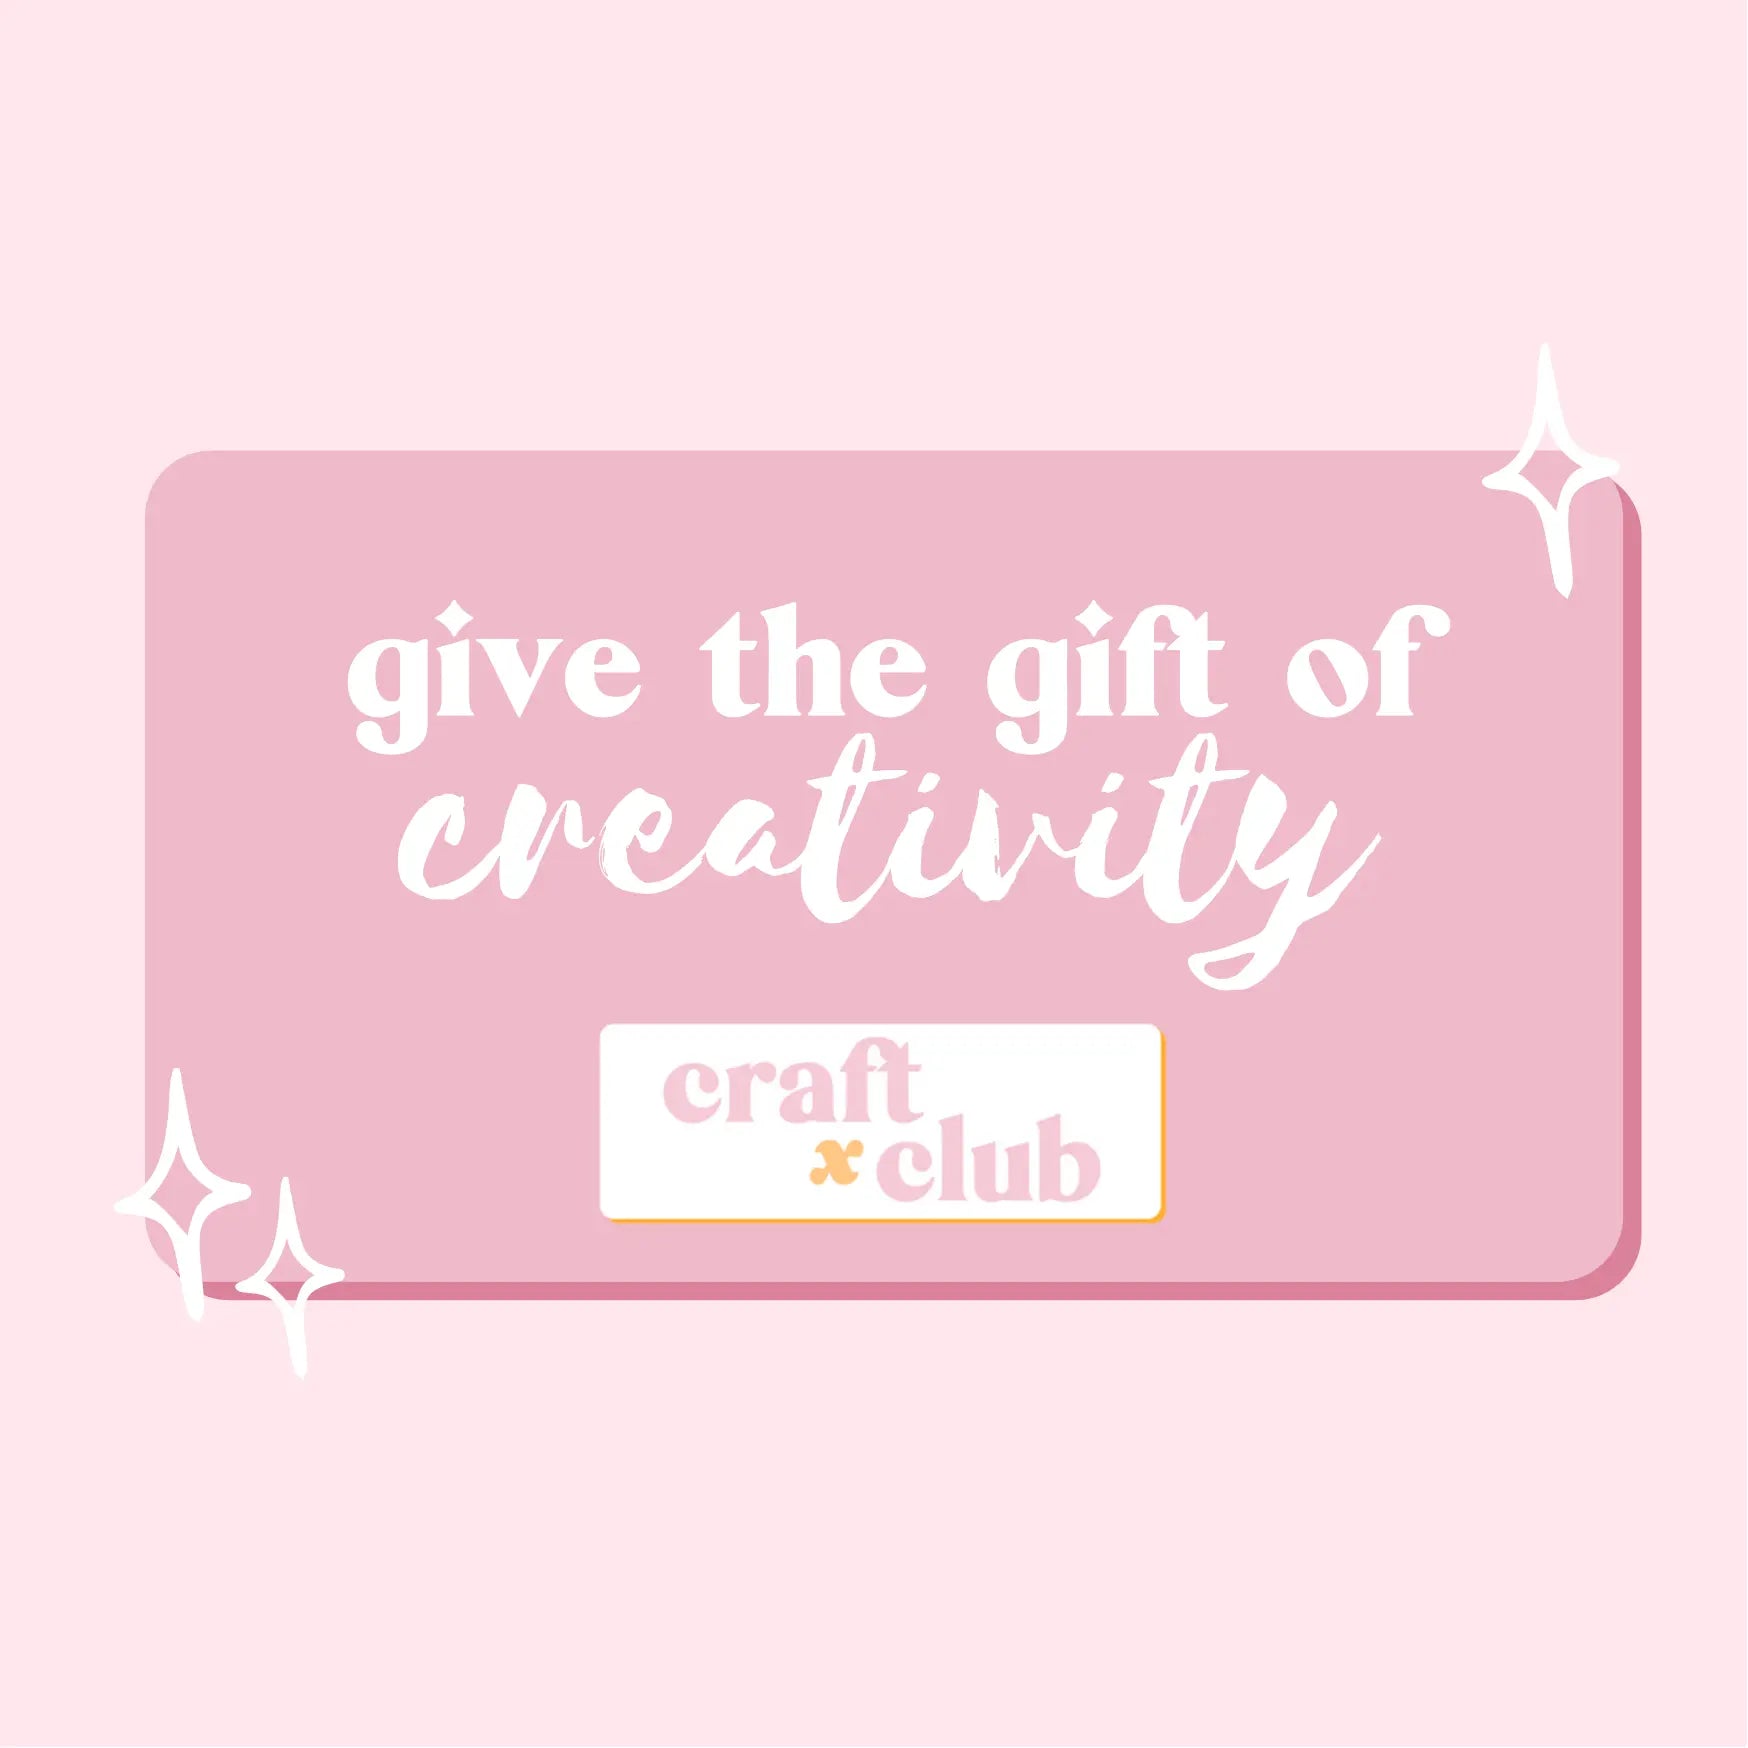 Craft Club Co Craft Club Gift Card. Image shows a pink graphic gift card with the text "give the gift of creativity" on it.